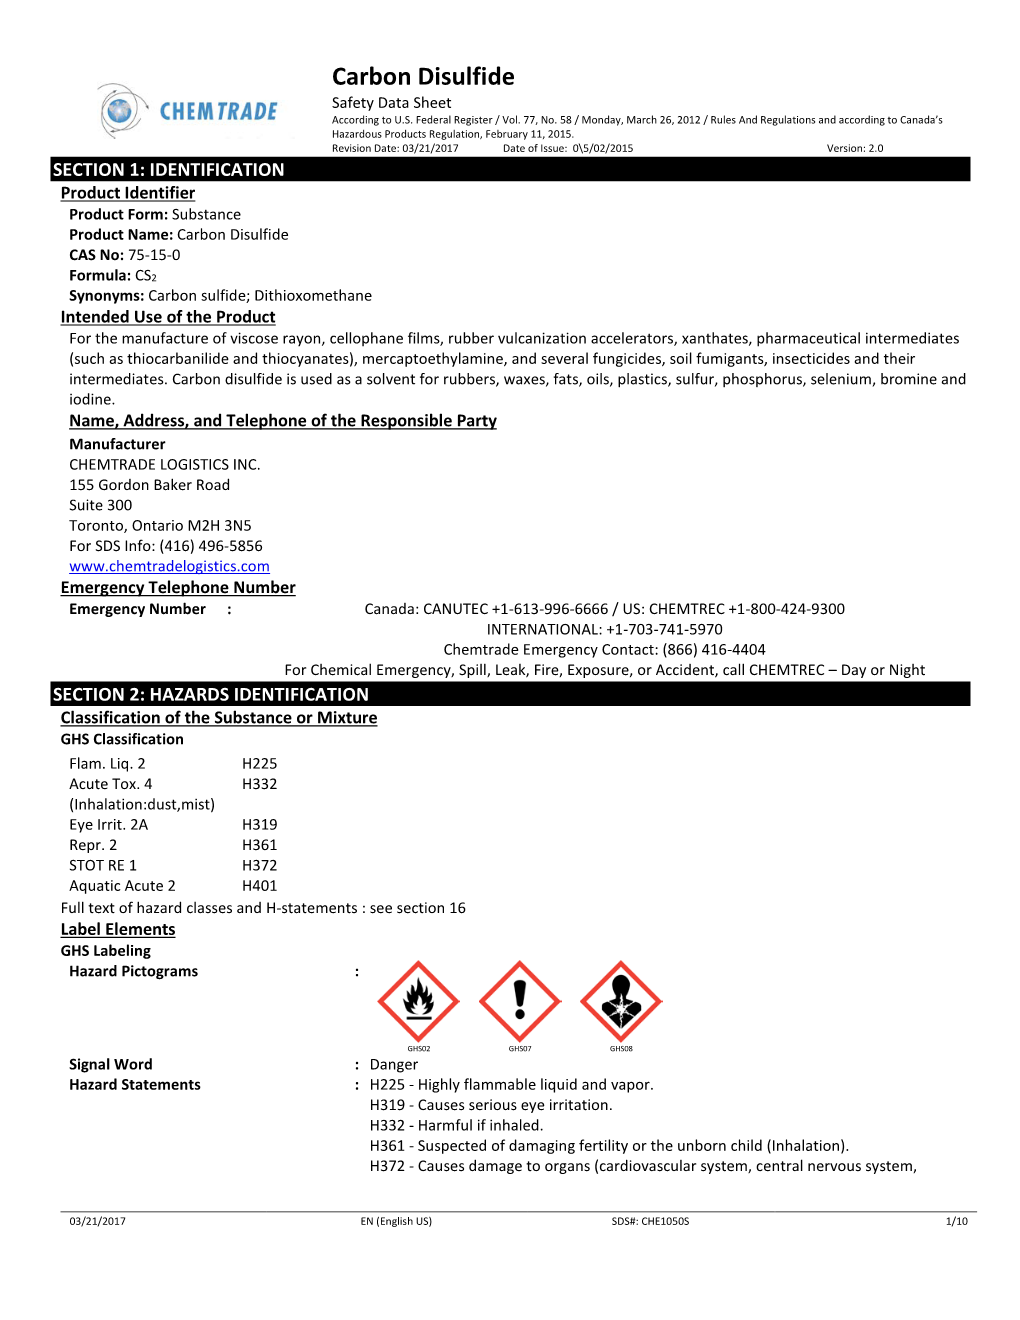 Carbon Disulfide Safety Data Sheet According to U.S